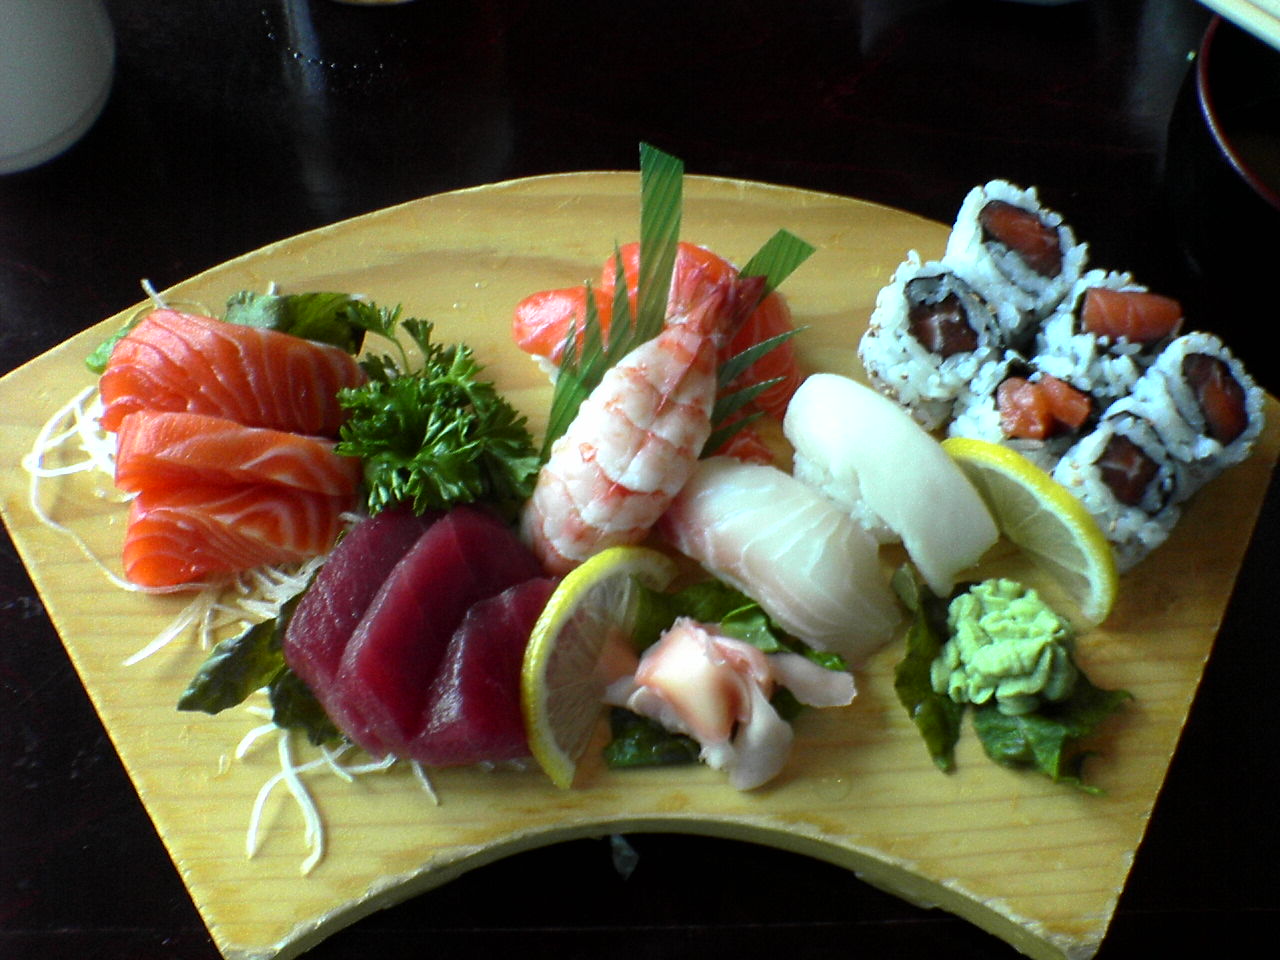 A traditional sushi meal.